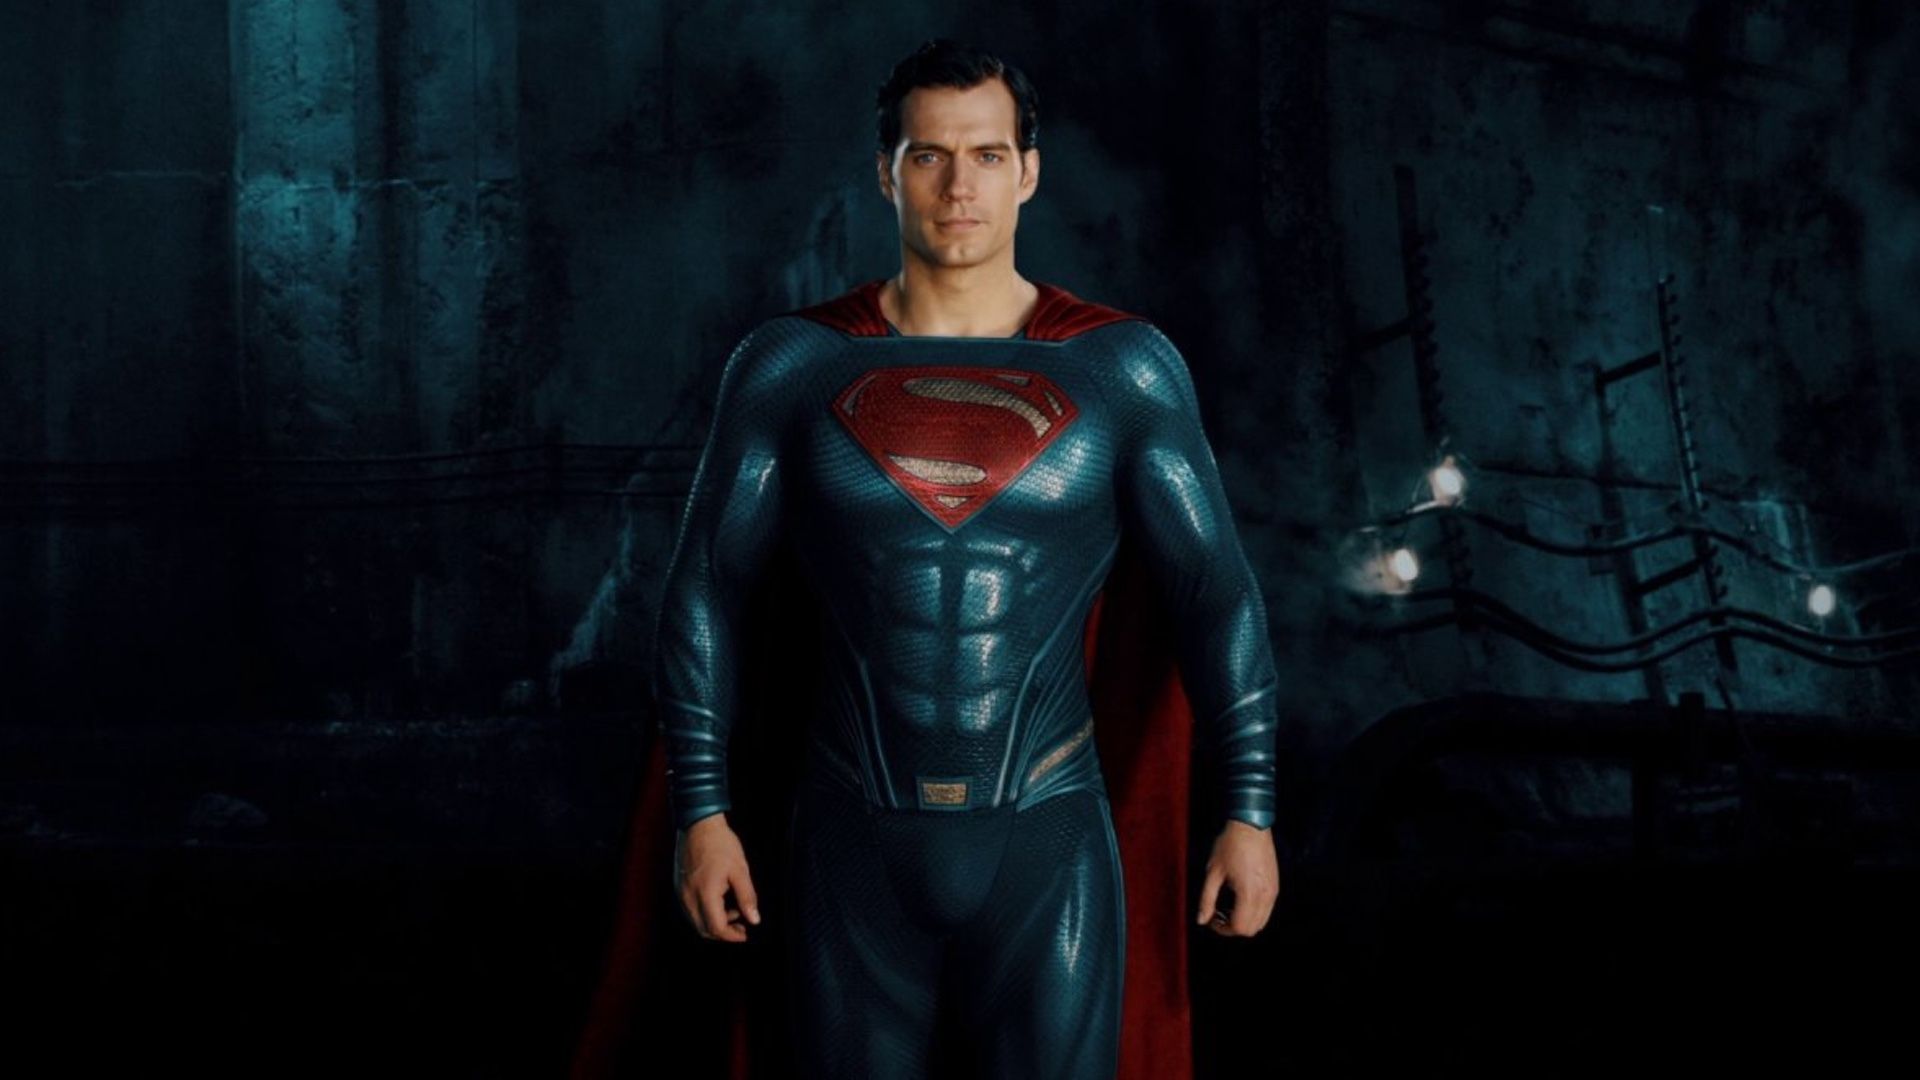 Henry Cavill screenshots, image and picture